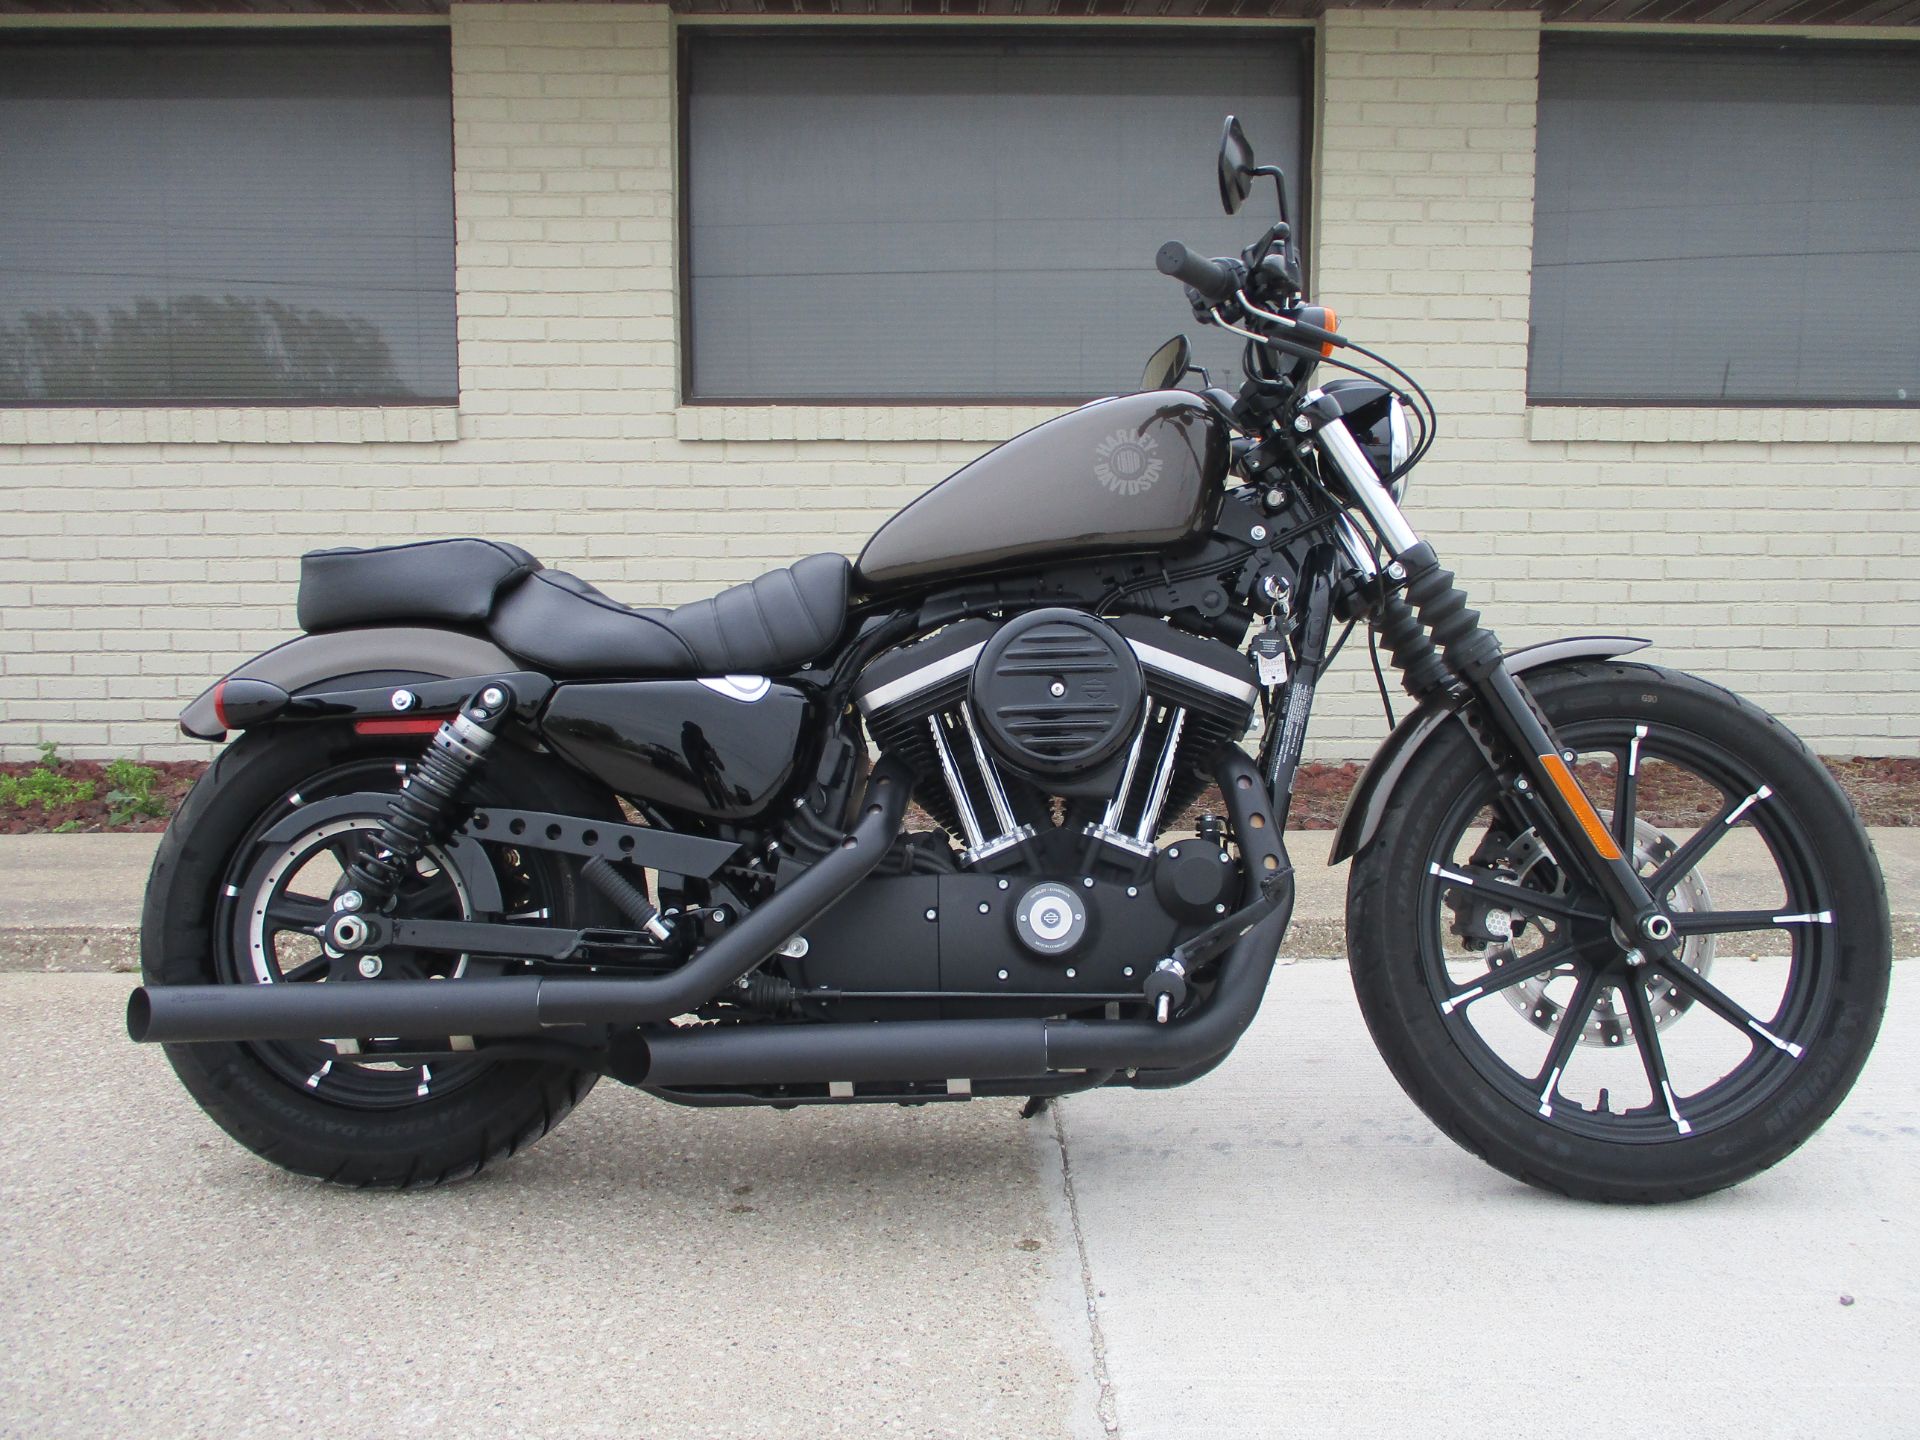 Used 2020 Harley Davidson Iron 883 Motorcycles In Winterset Ia Stock Number N A